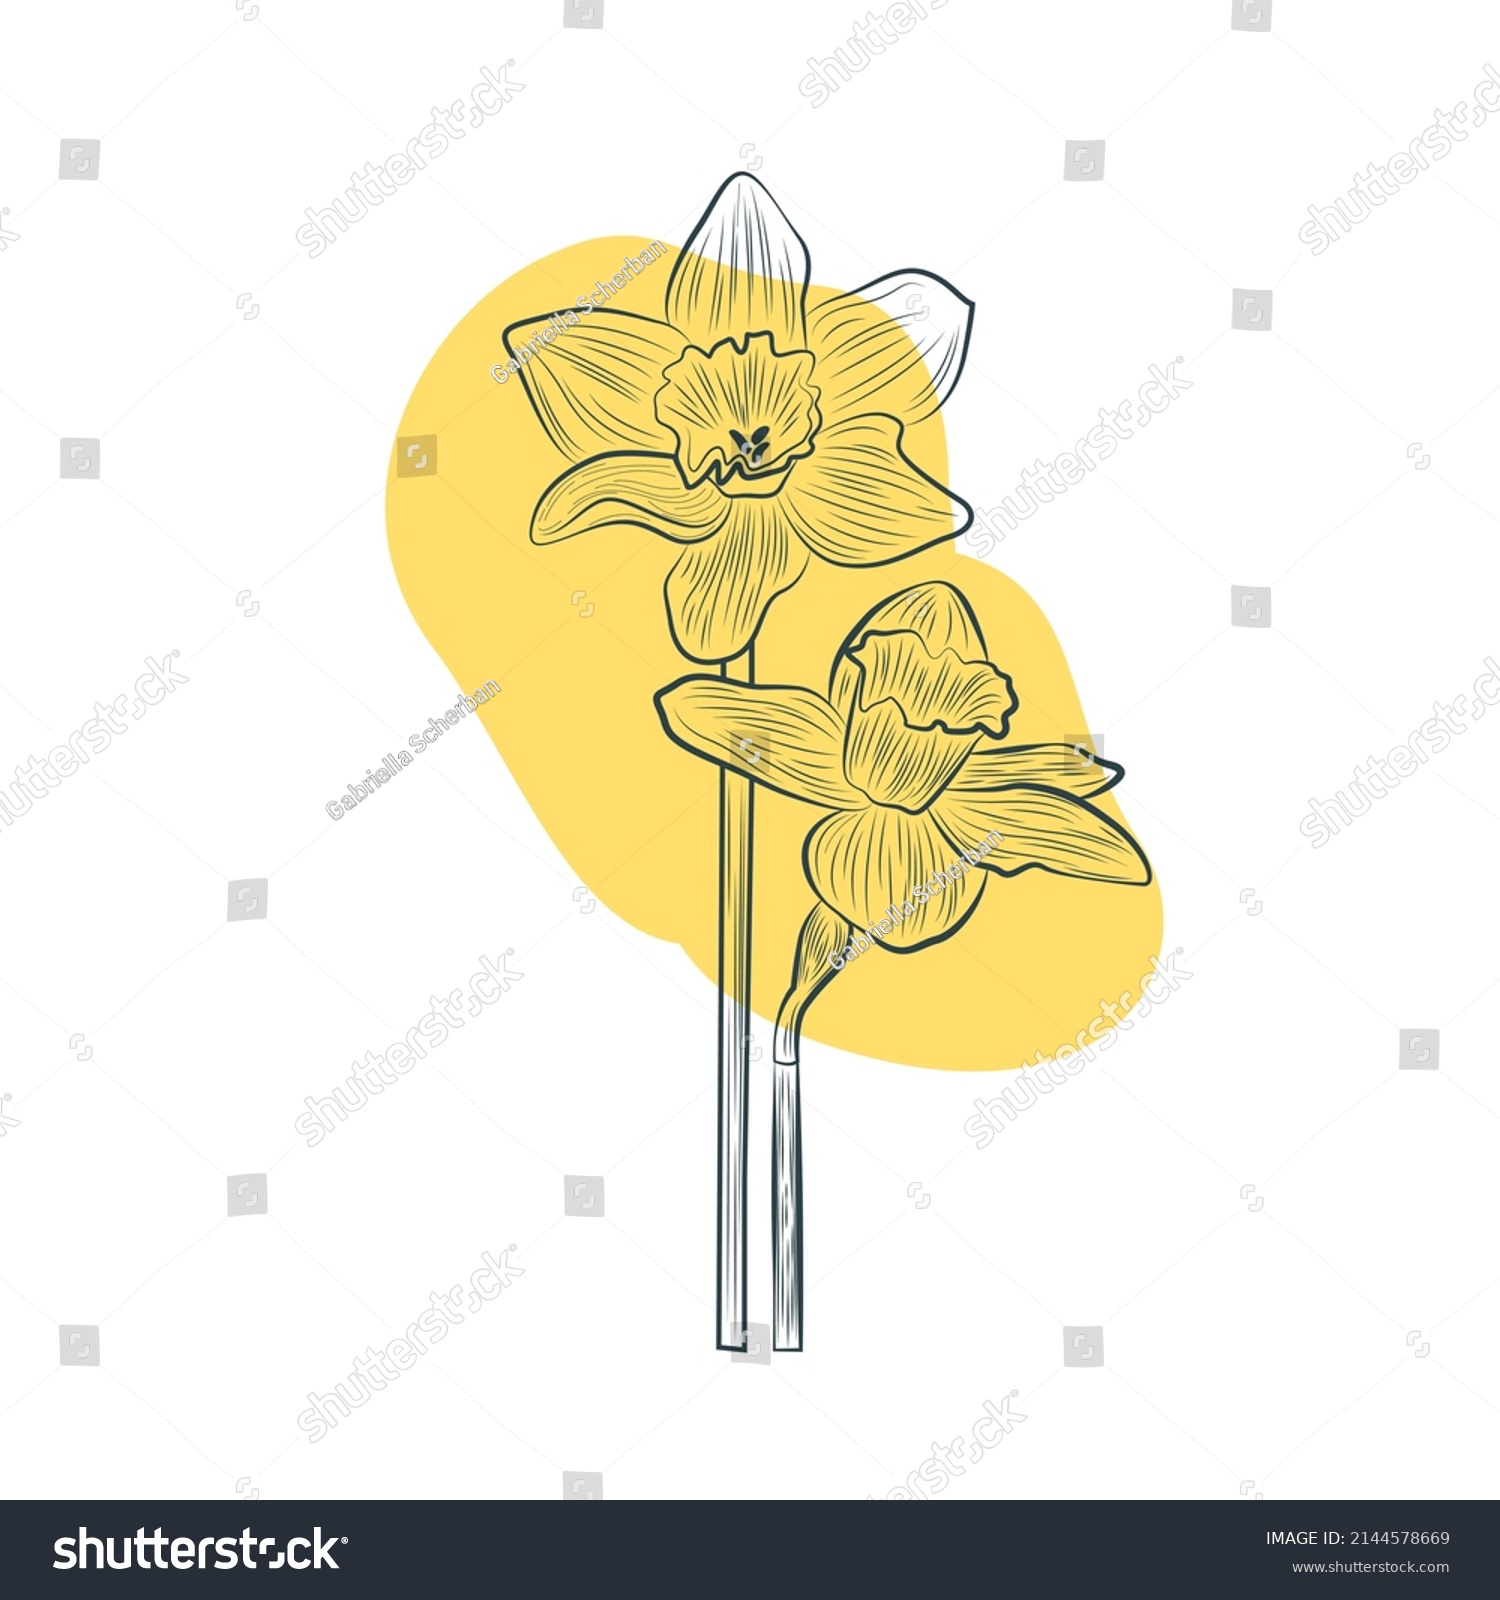 SVG of Daffodil flower in yellow color continuous line drawing. Blossoming Narcissus in spring isolated on white background. Garden flower with minimalist design in hand drawn style. Vector illustration svg